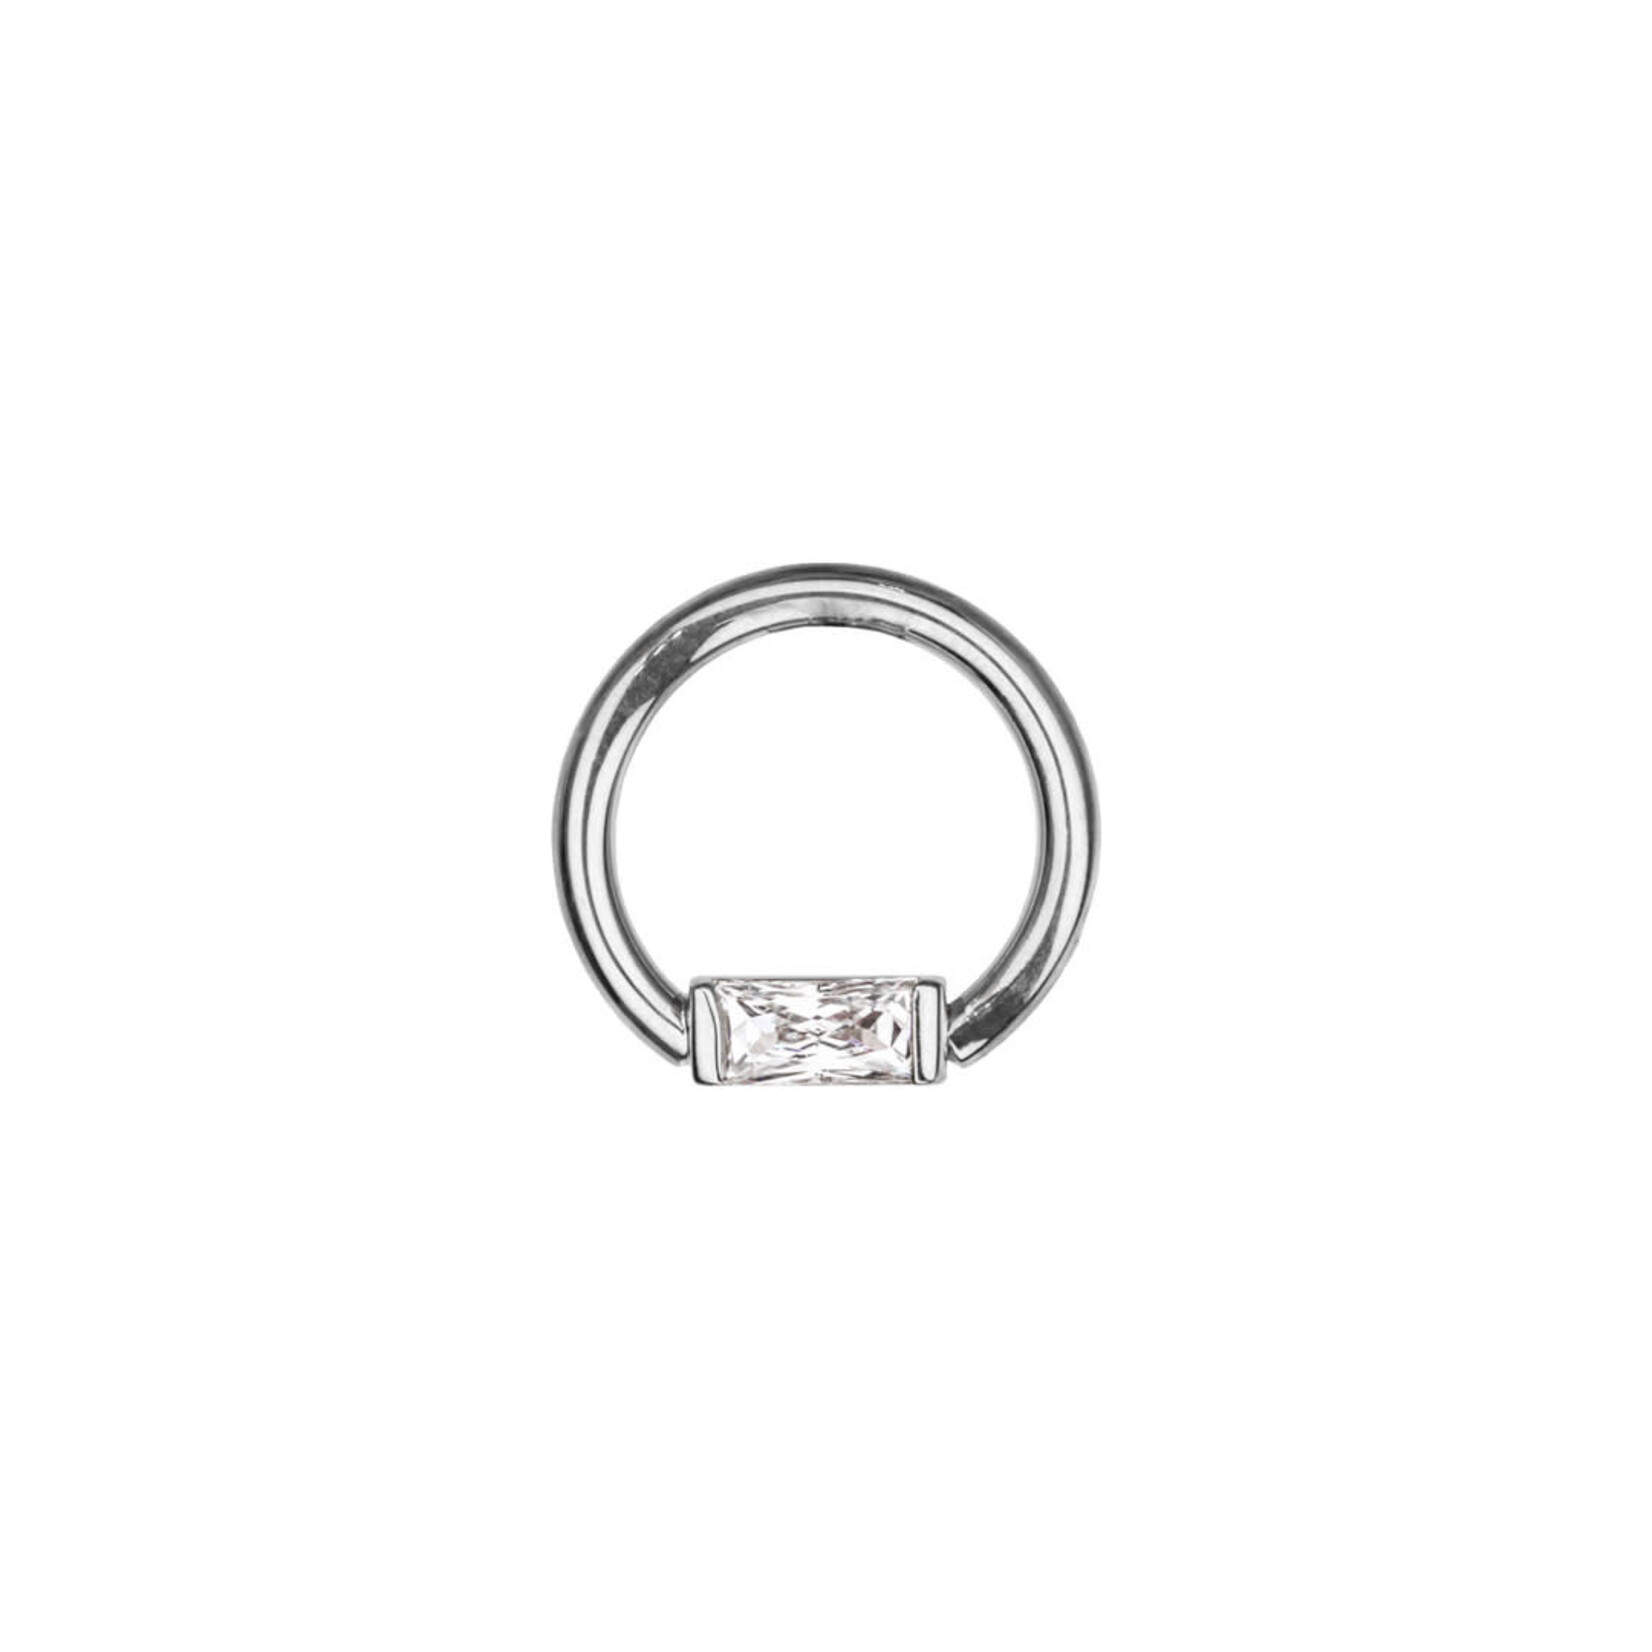 BVLA BVLA 16g fixed ring with CZ baguette. Nipple orientation